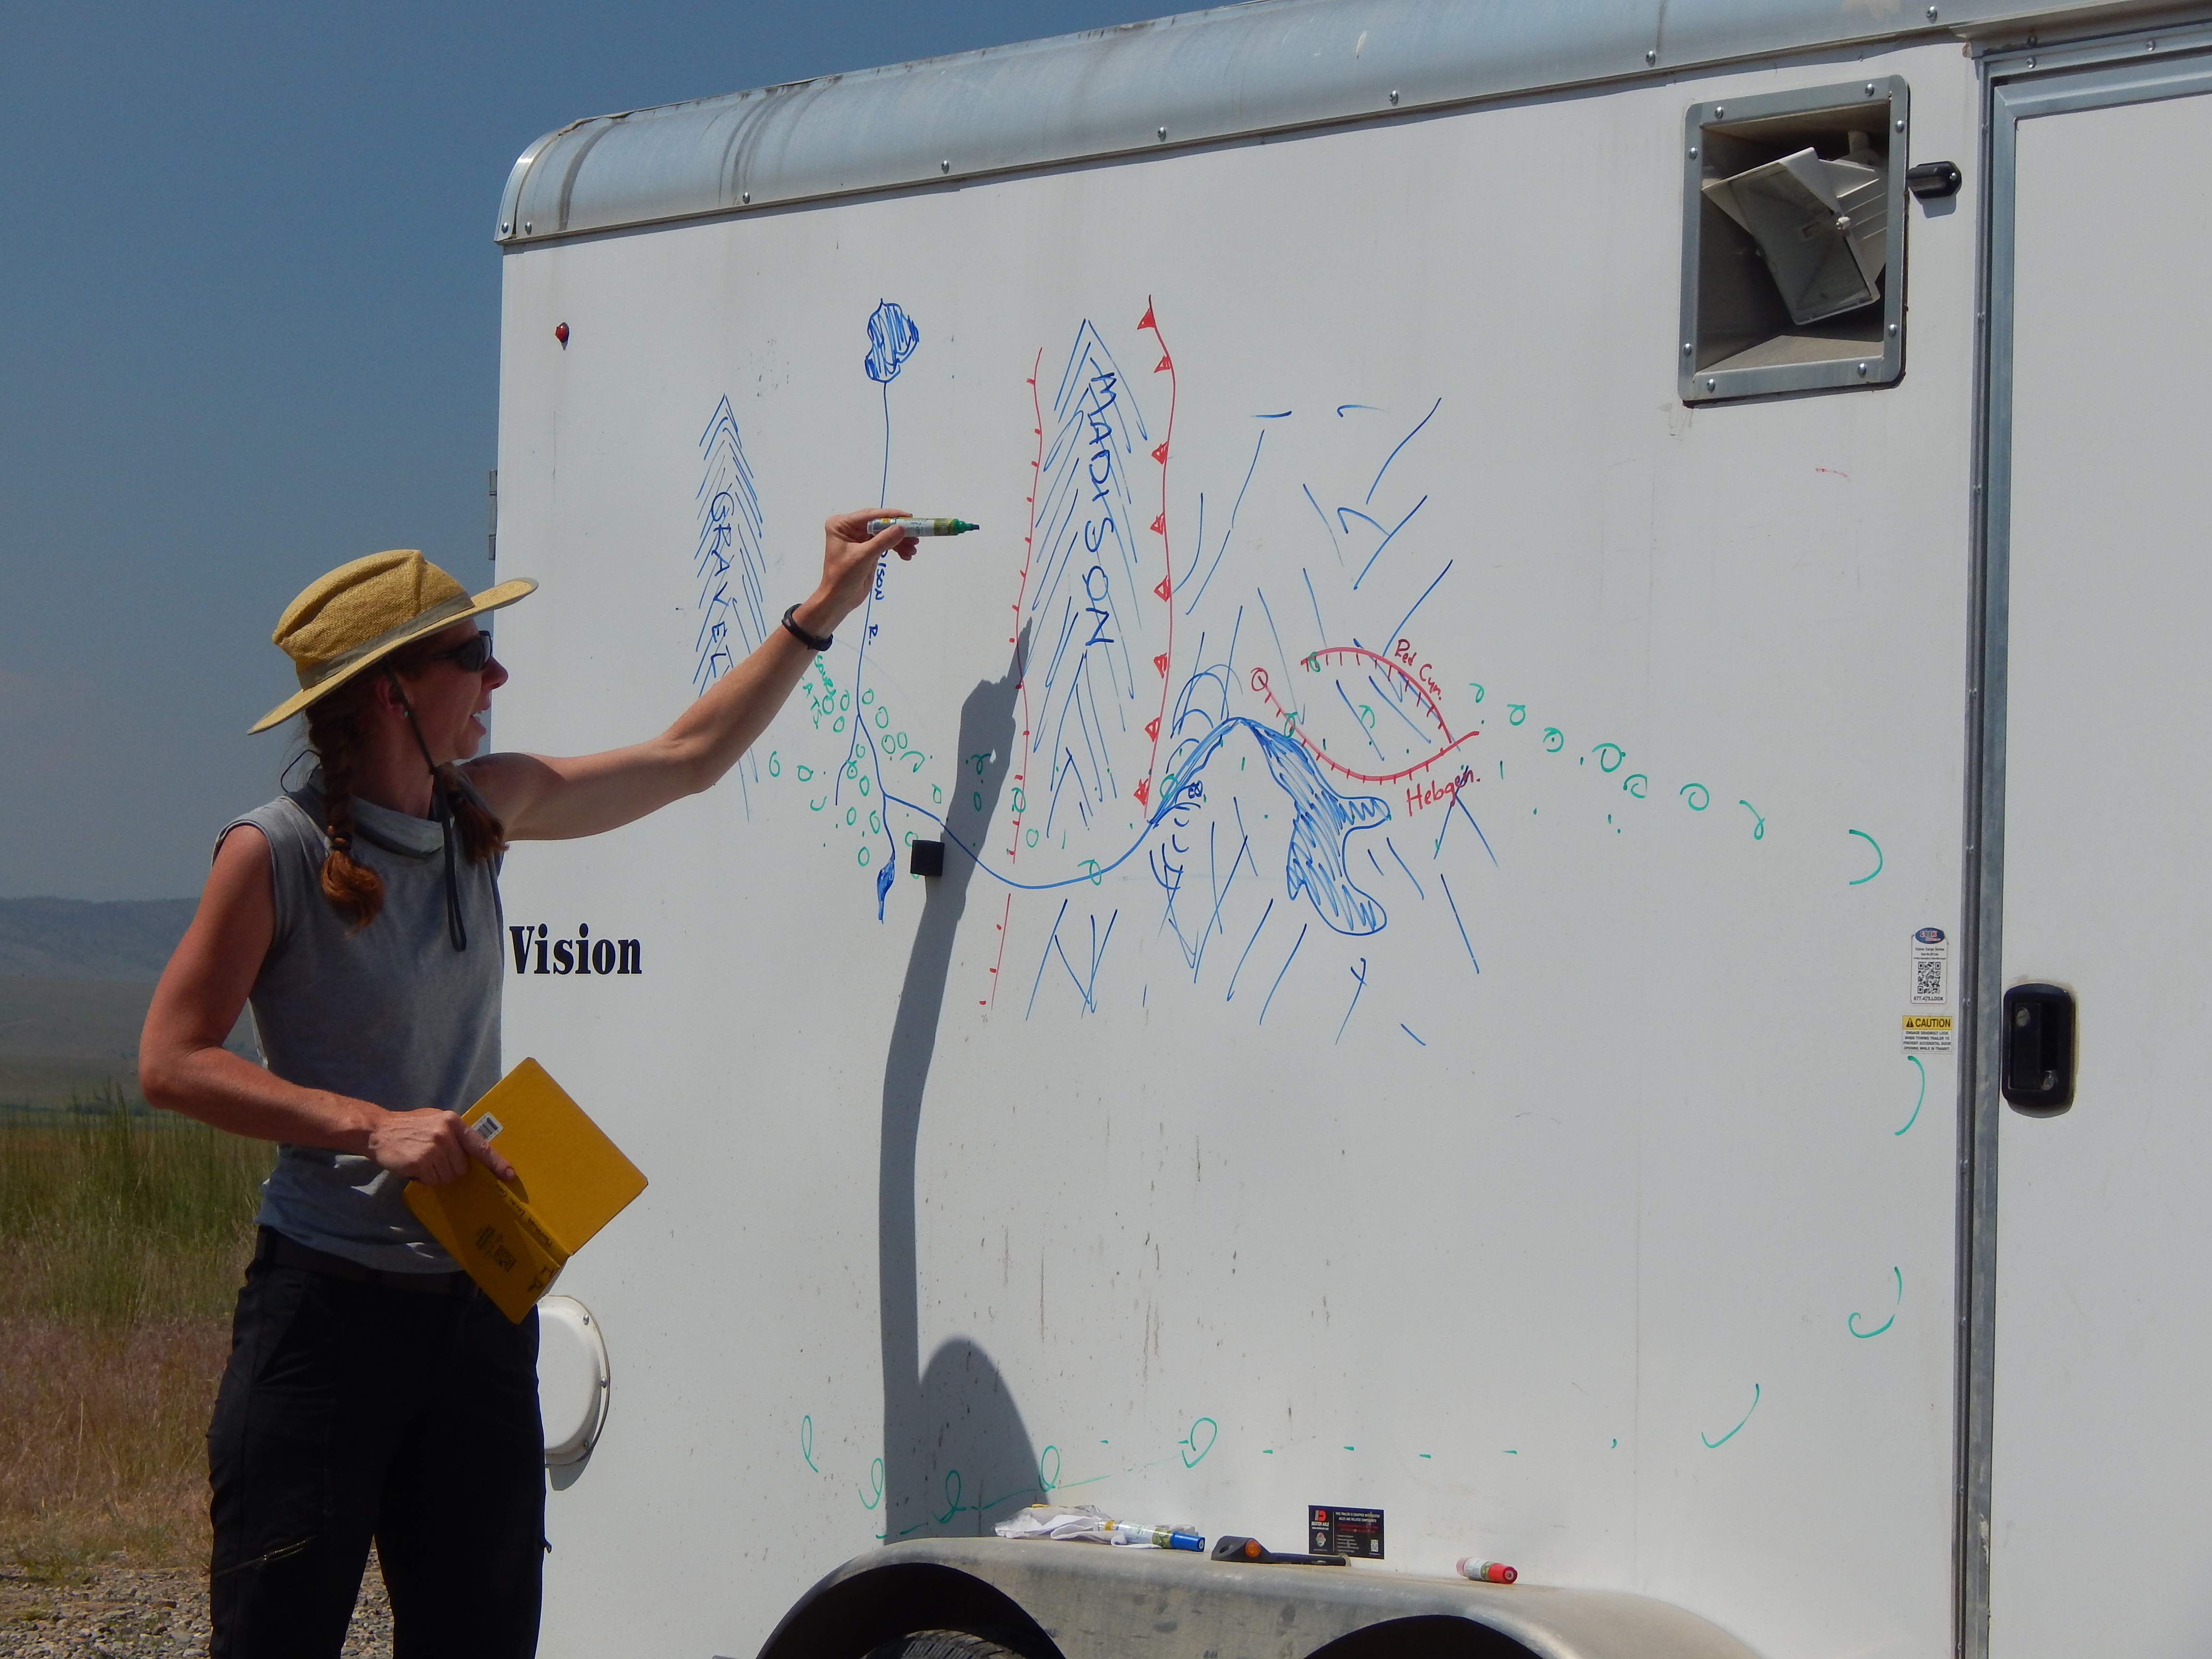 Dr. Jean Dixon delivering a lecture in the field using a trailer as a white board